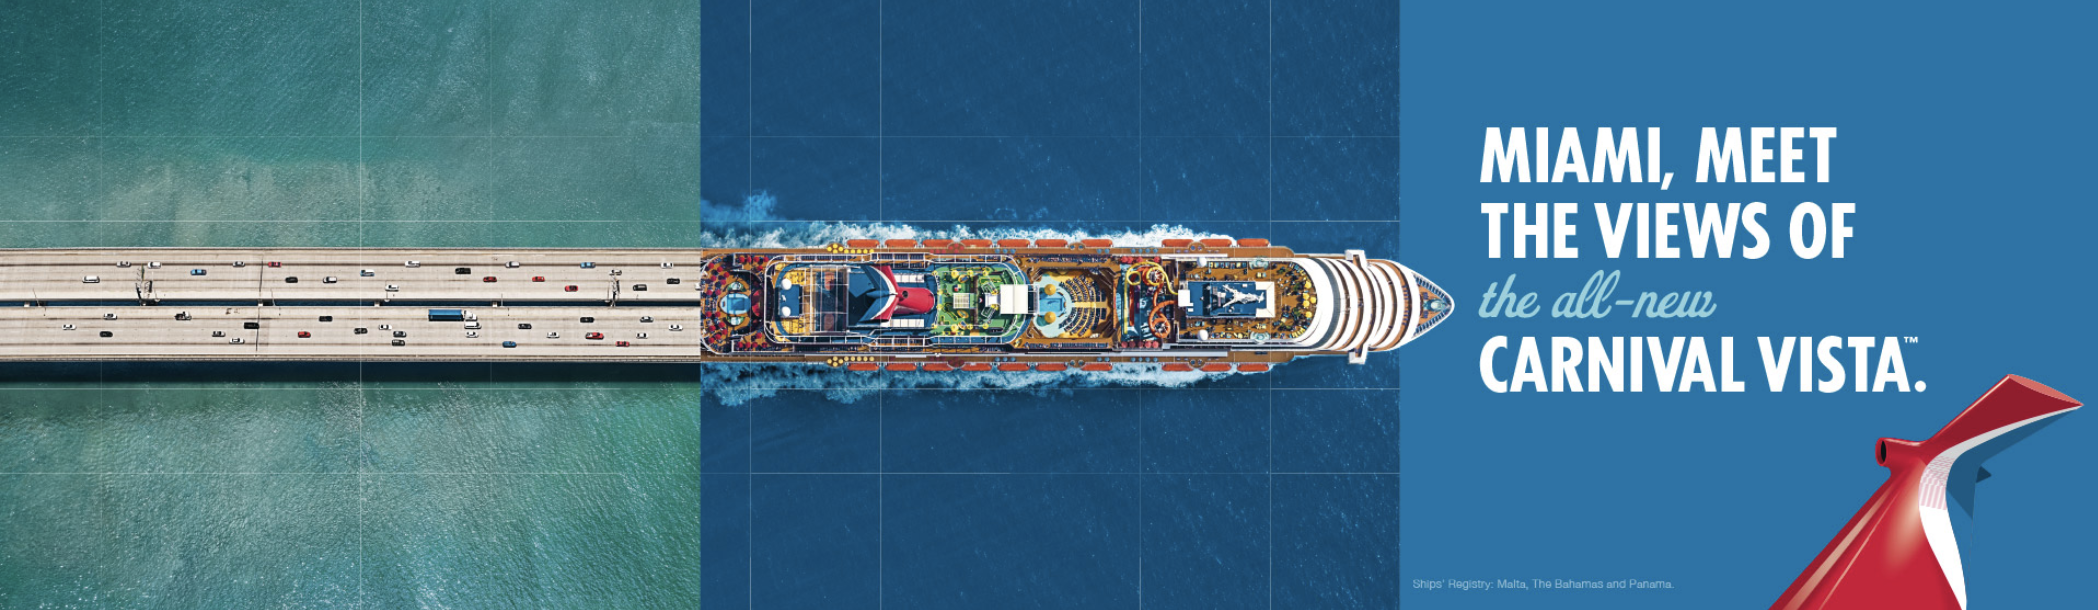 Carnival_Cruise_PhotoProducer_002.png